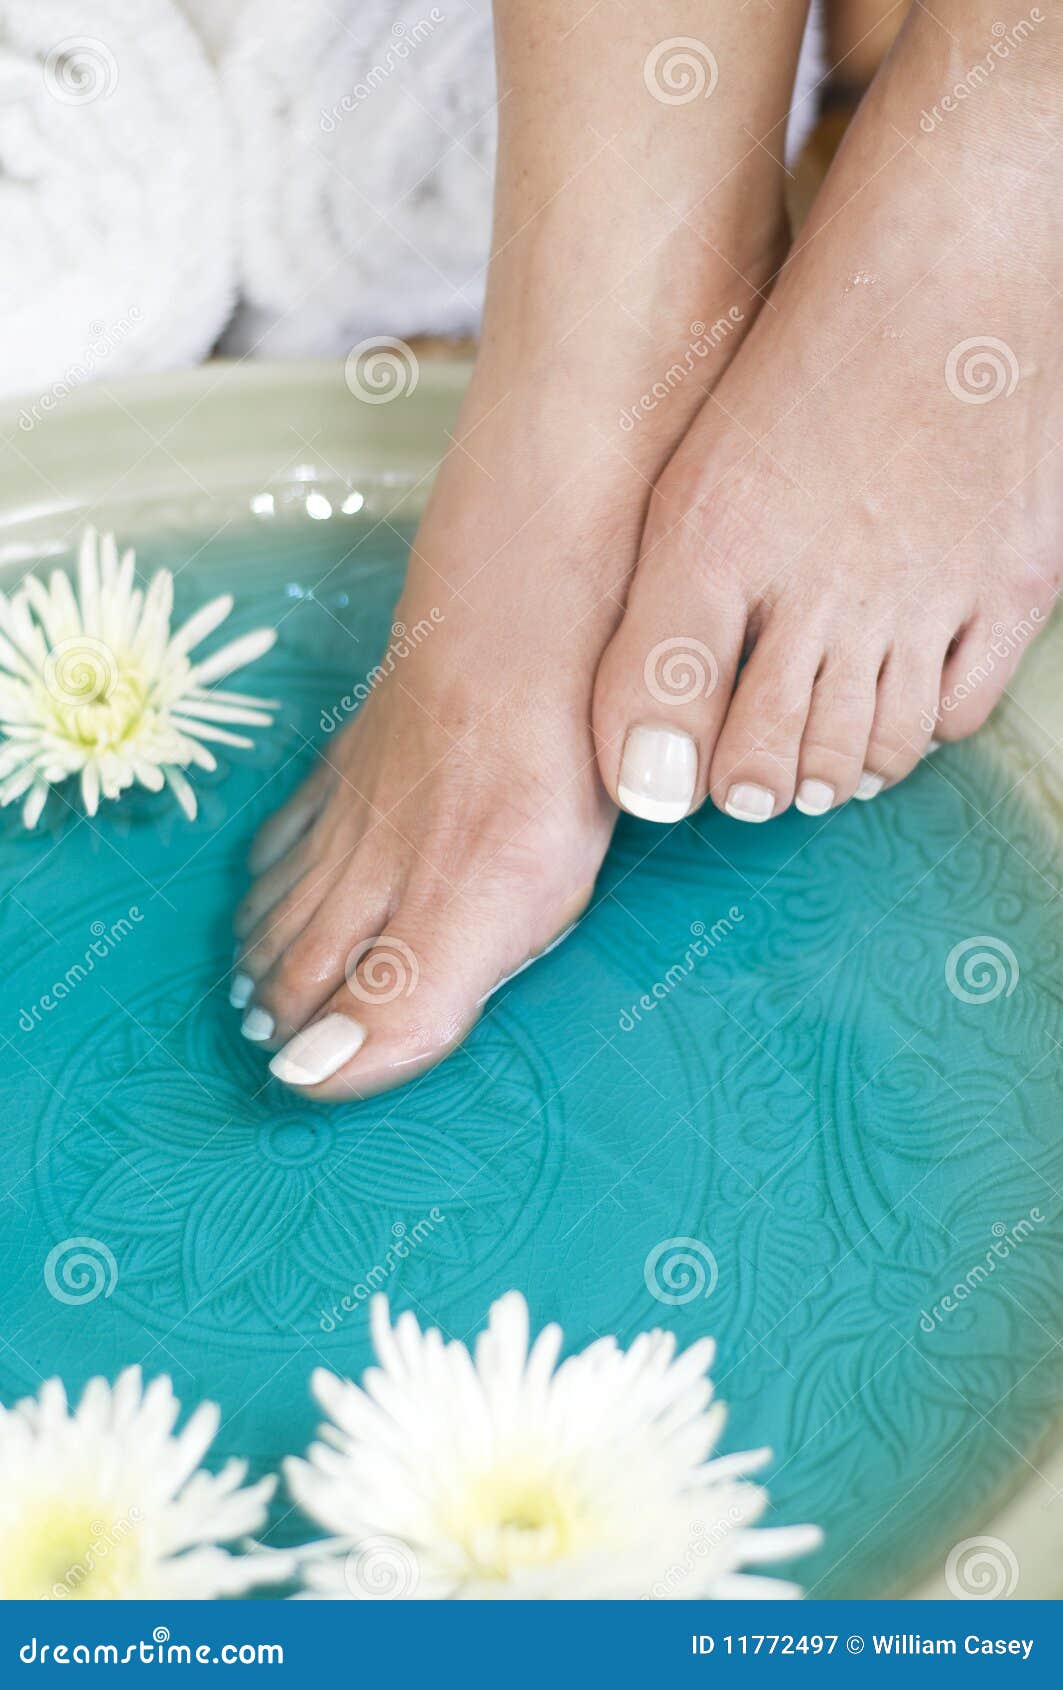 Foot Bath with Herbs and Flowers 2 Stock Image - Image of feet, flower ...